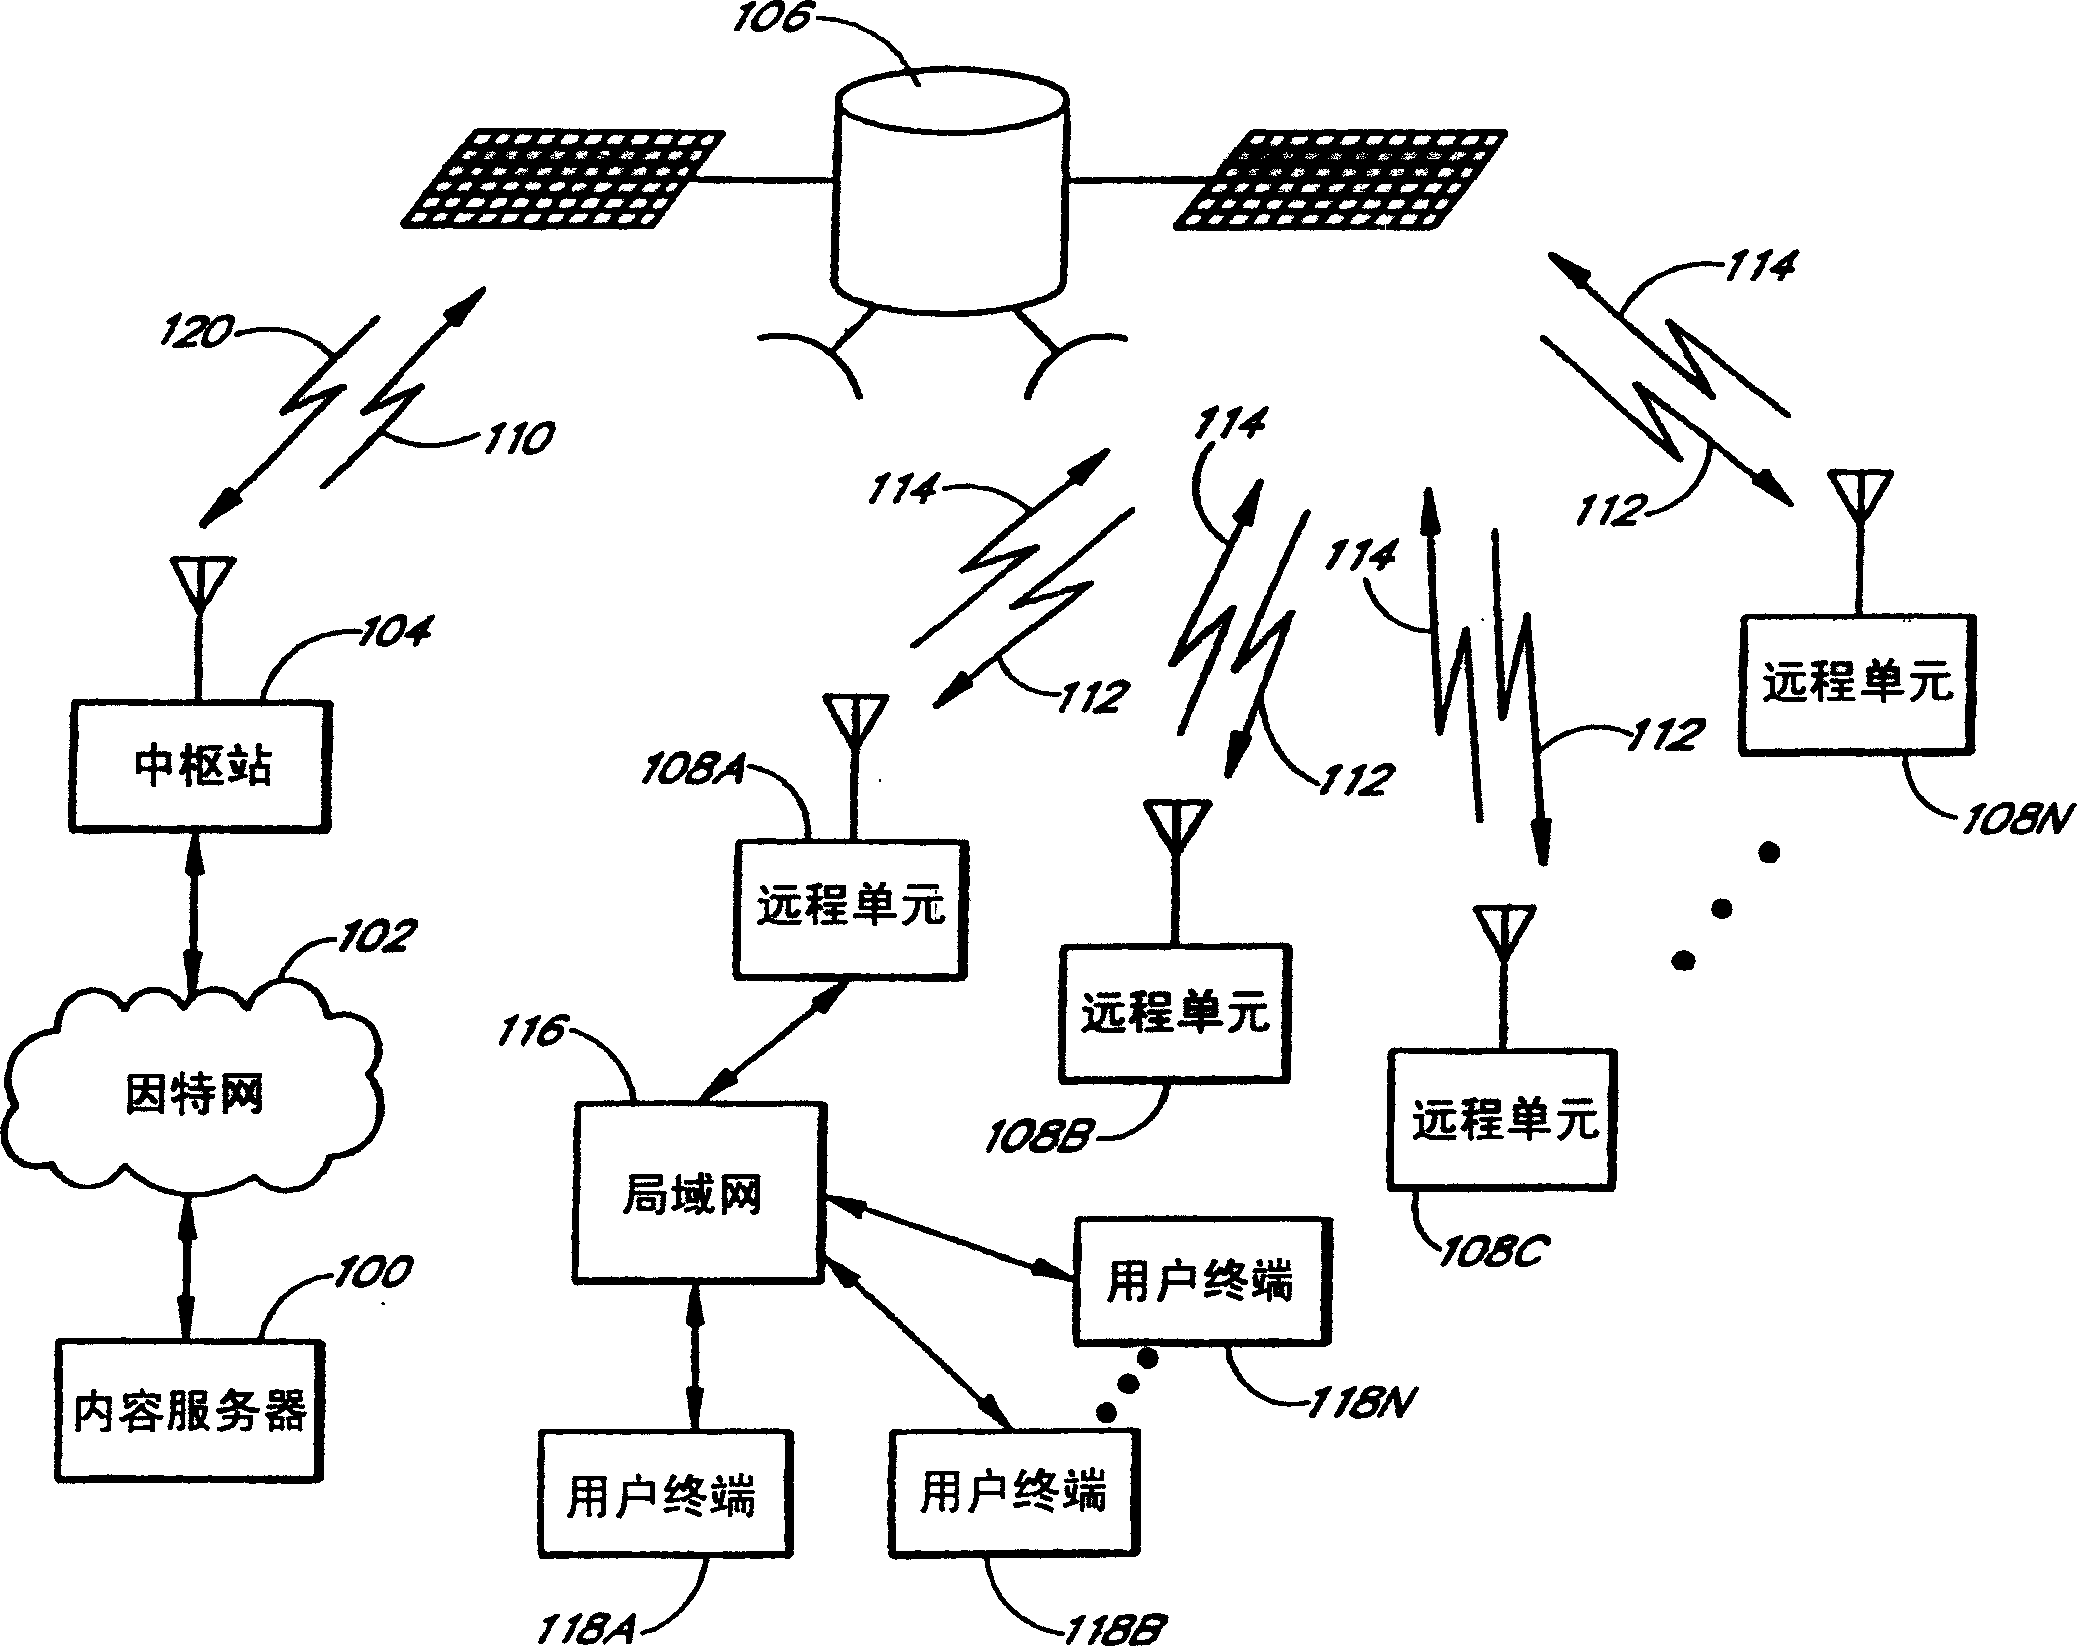 Timing synchronization and phase/frequency correction of QPSK signals